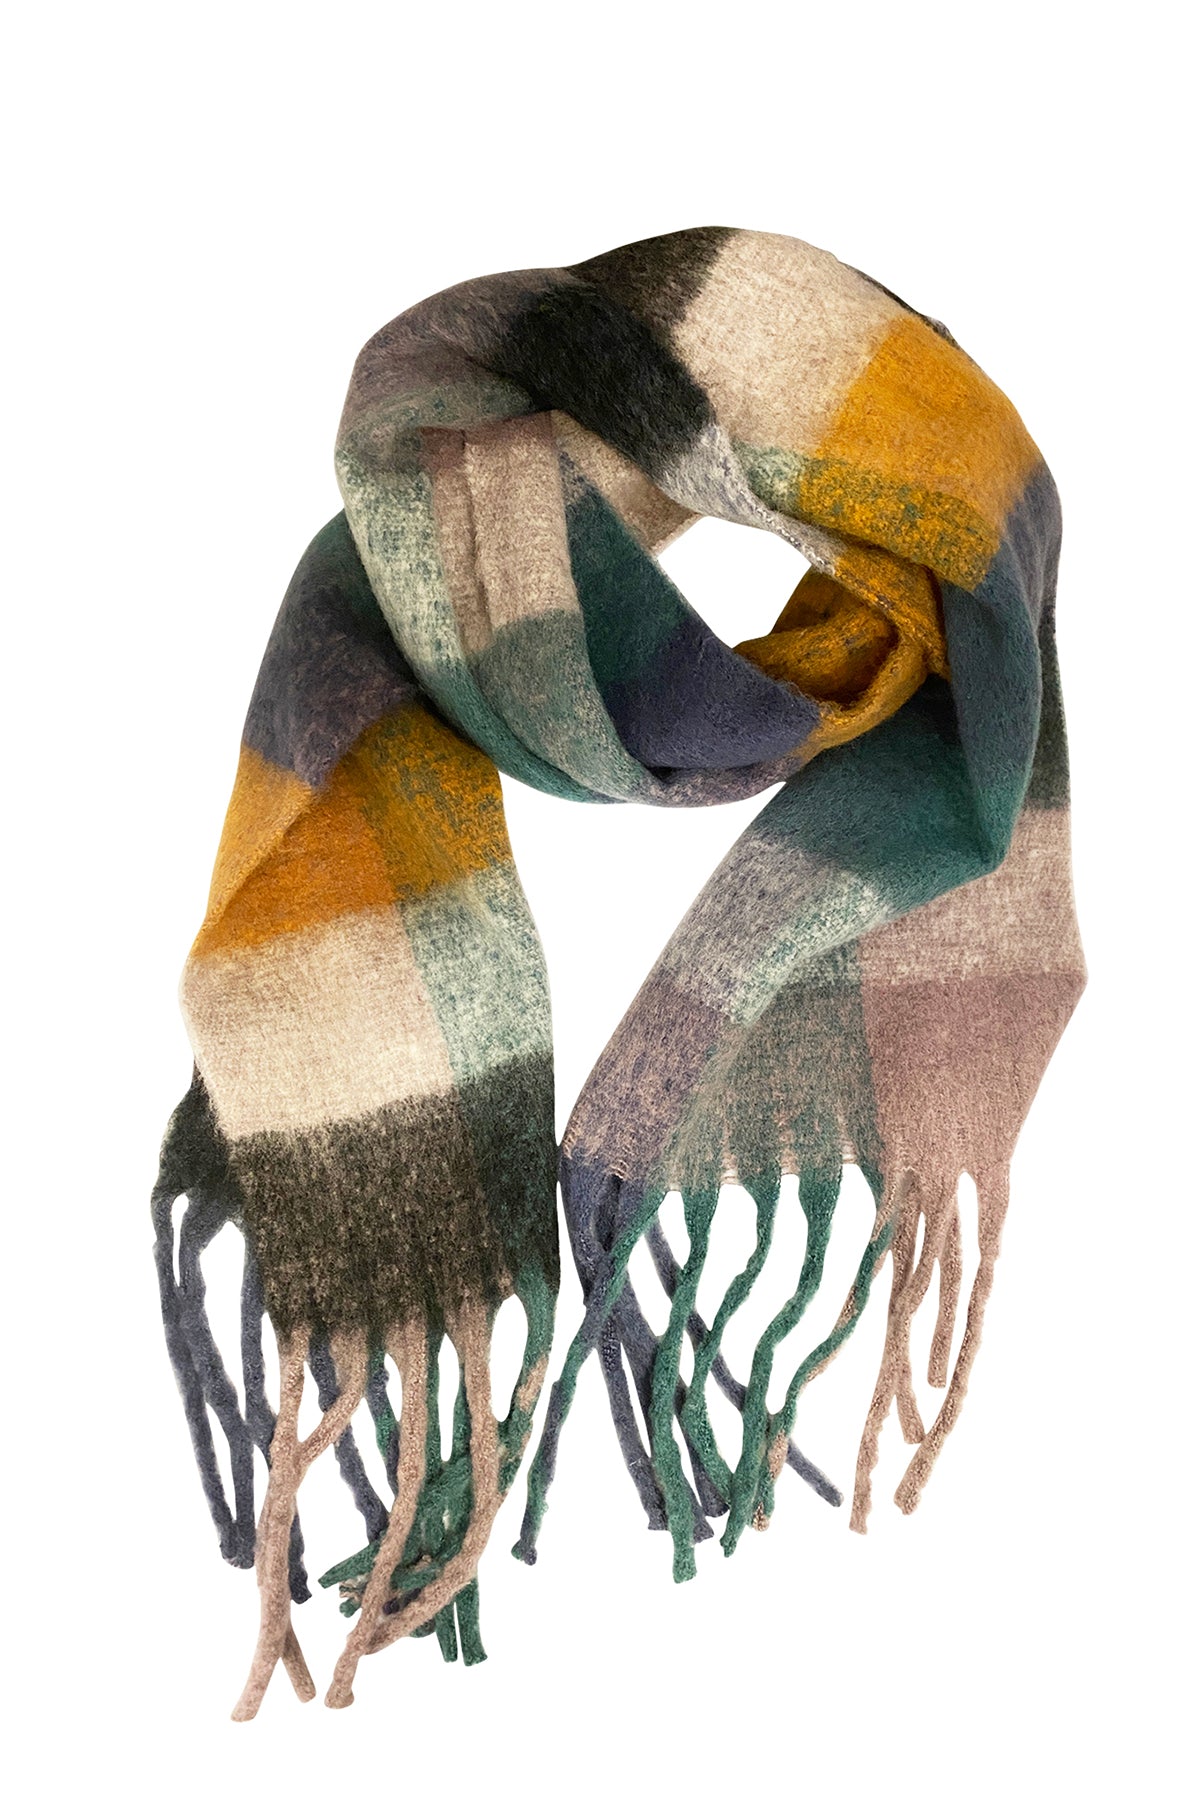 The STUDIO LOFTY FRINGE SCARF by Velvet by Graham & Spencer is a stunning multicolored plaid accessory with fringed ends, showcasing shades of yellow, green, blue, and beige—ideal for cold weather.-25421197967553